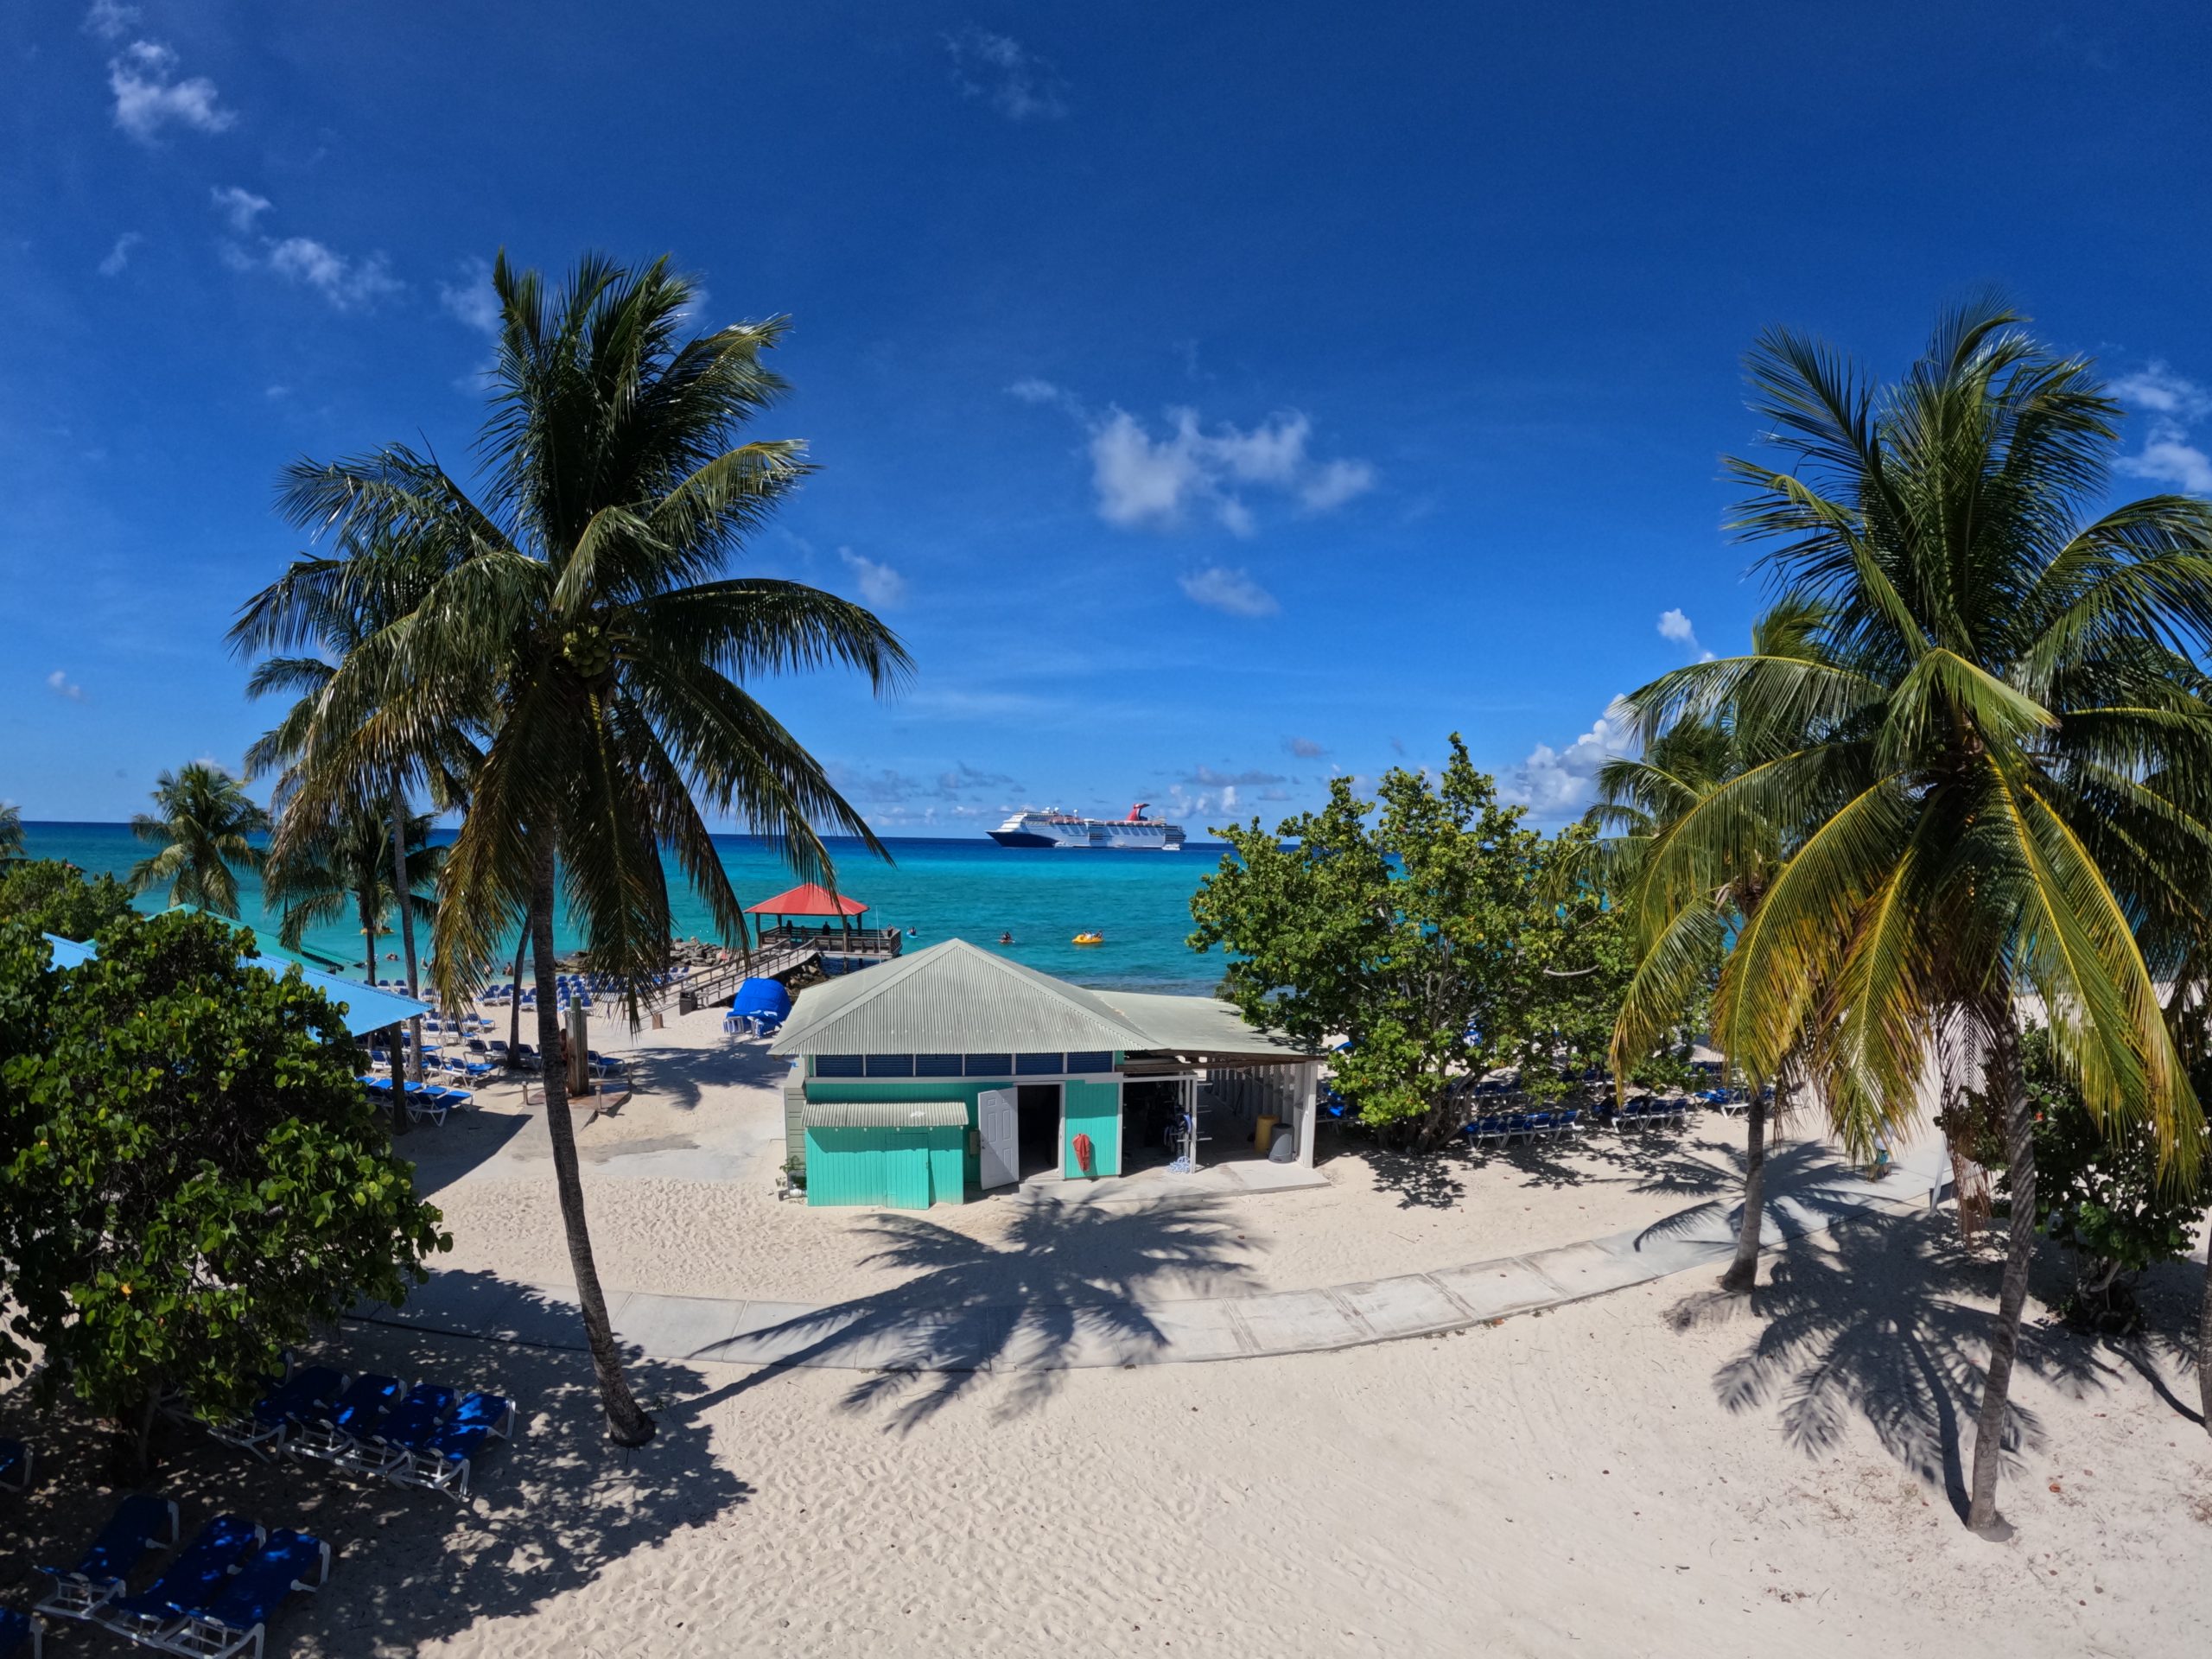 10 Essential Things to Know About Princess Cays Before Visiting